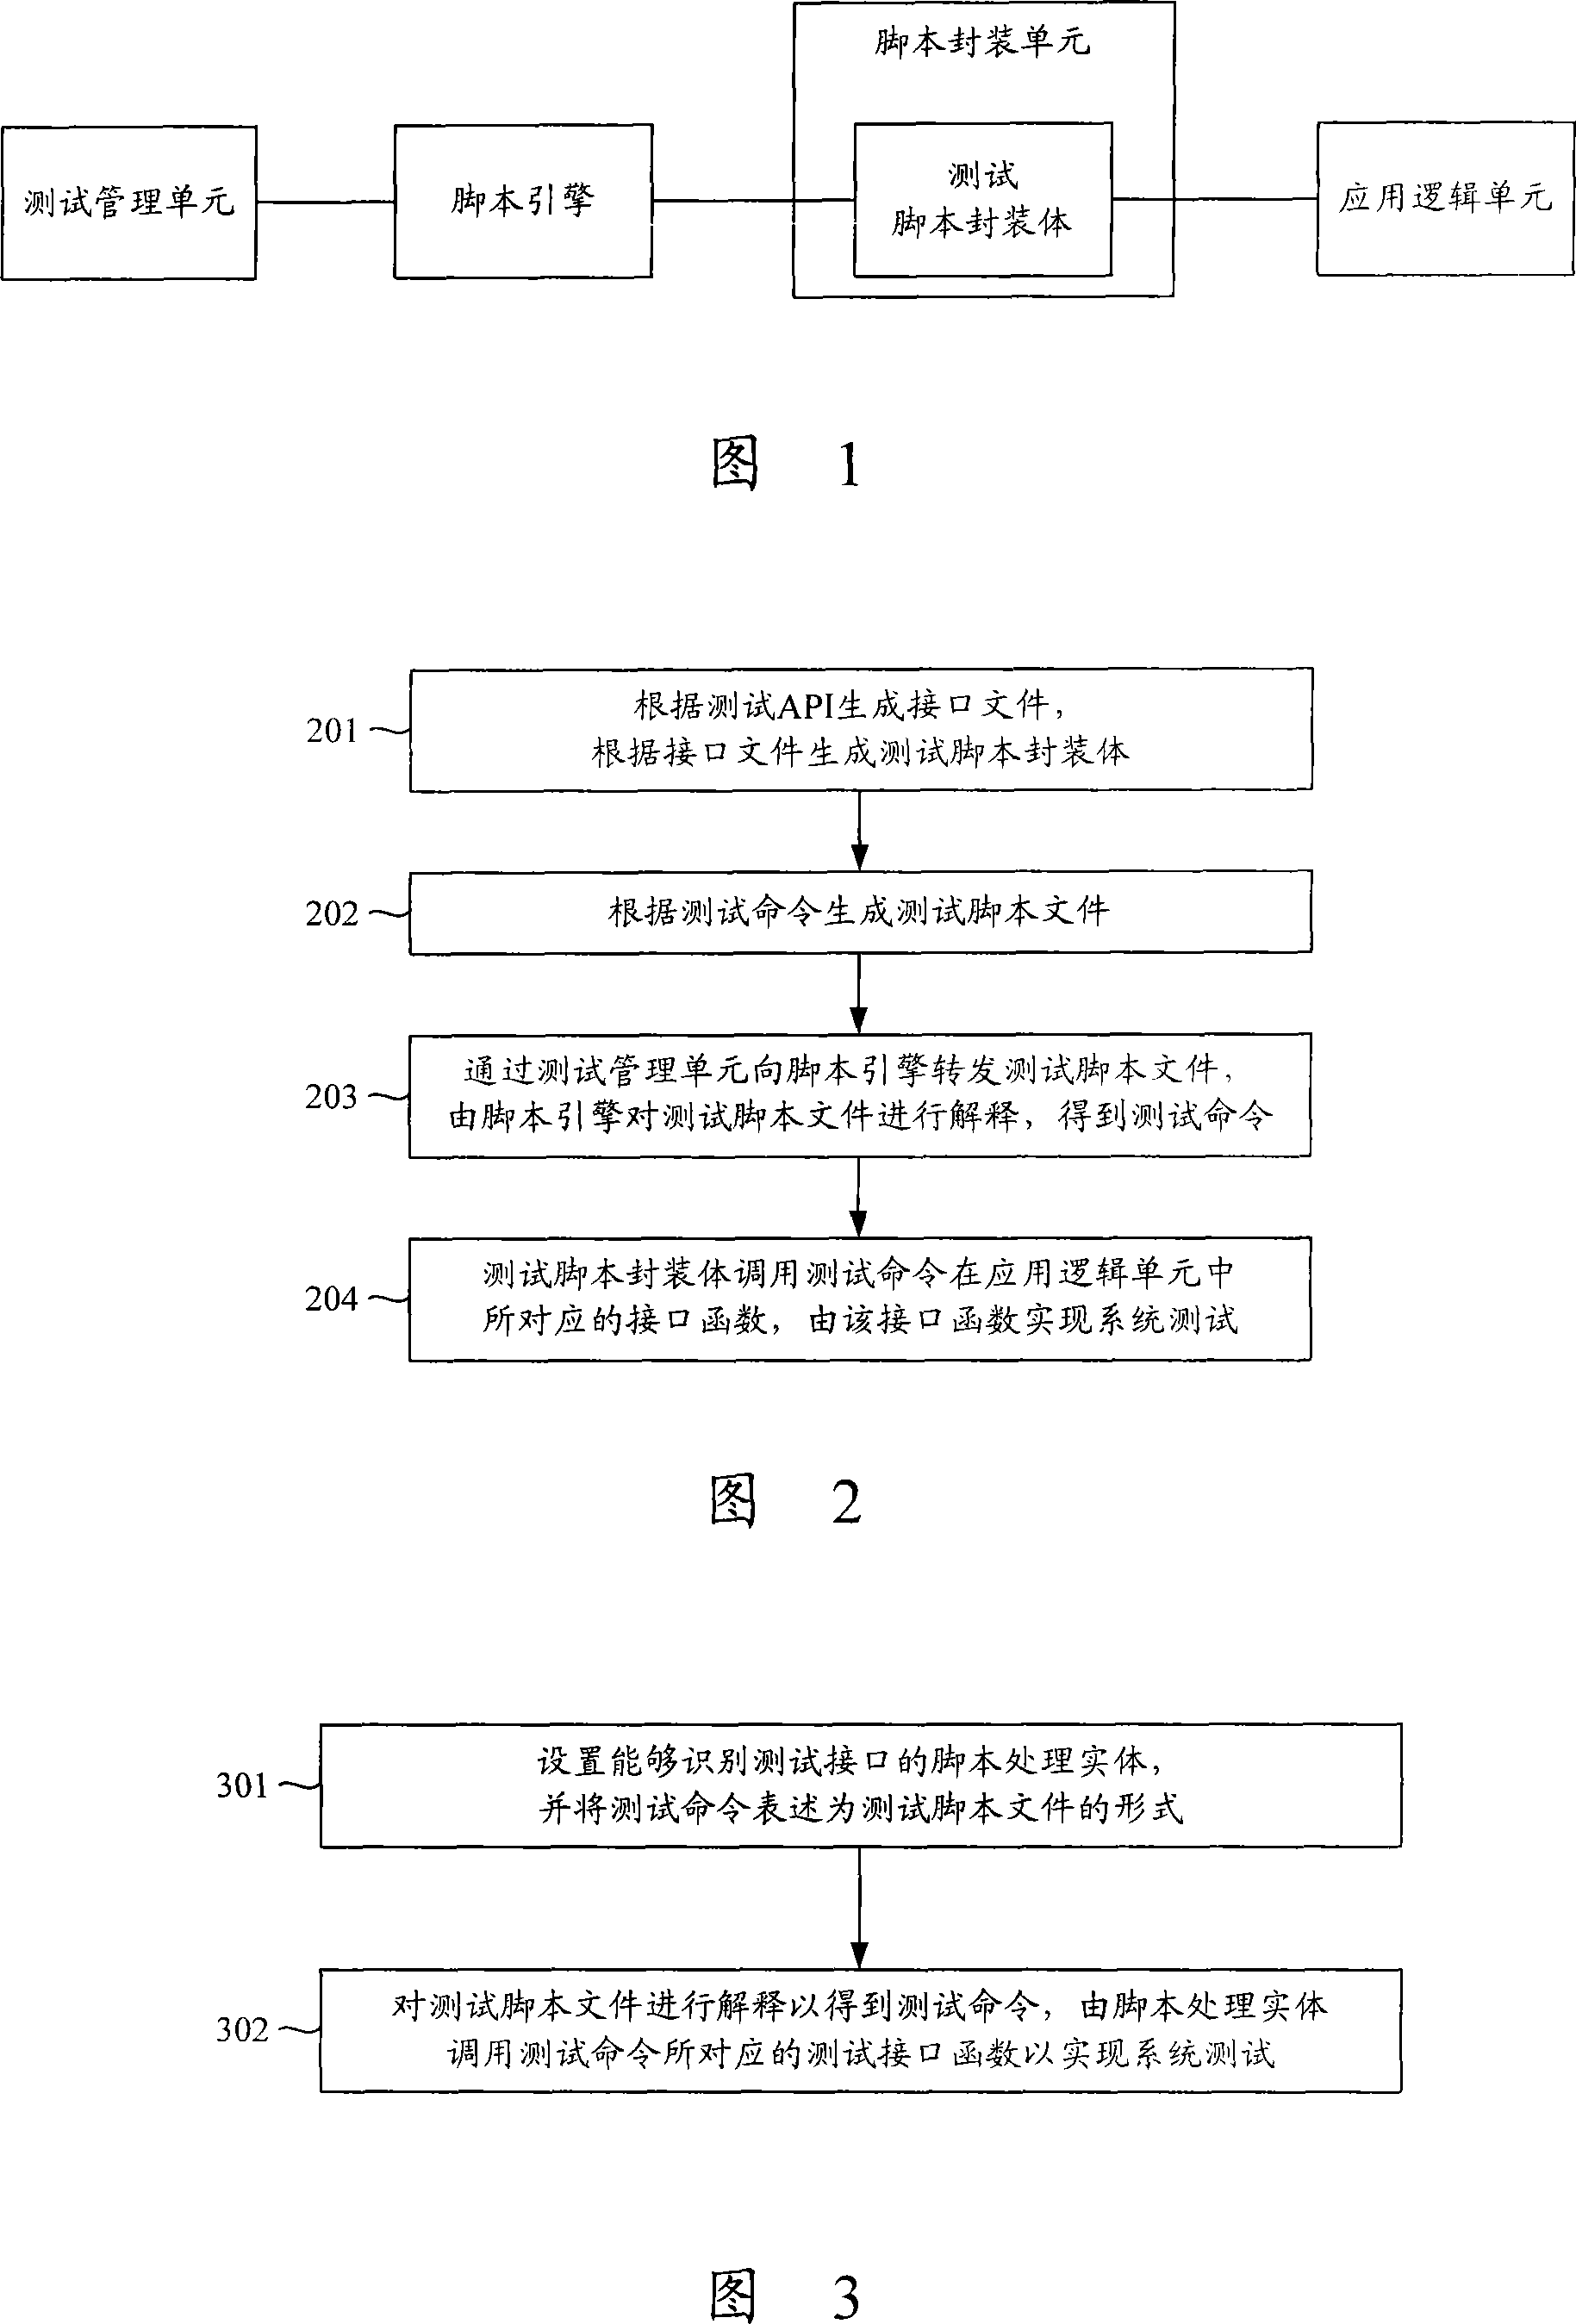 Testing device and method